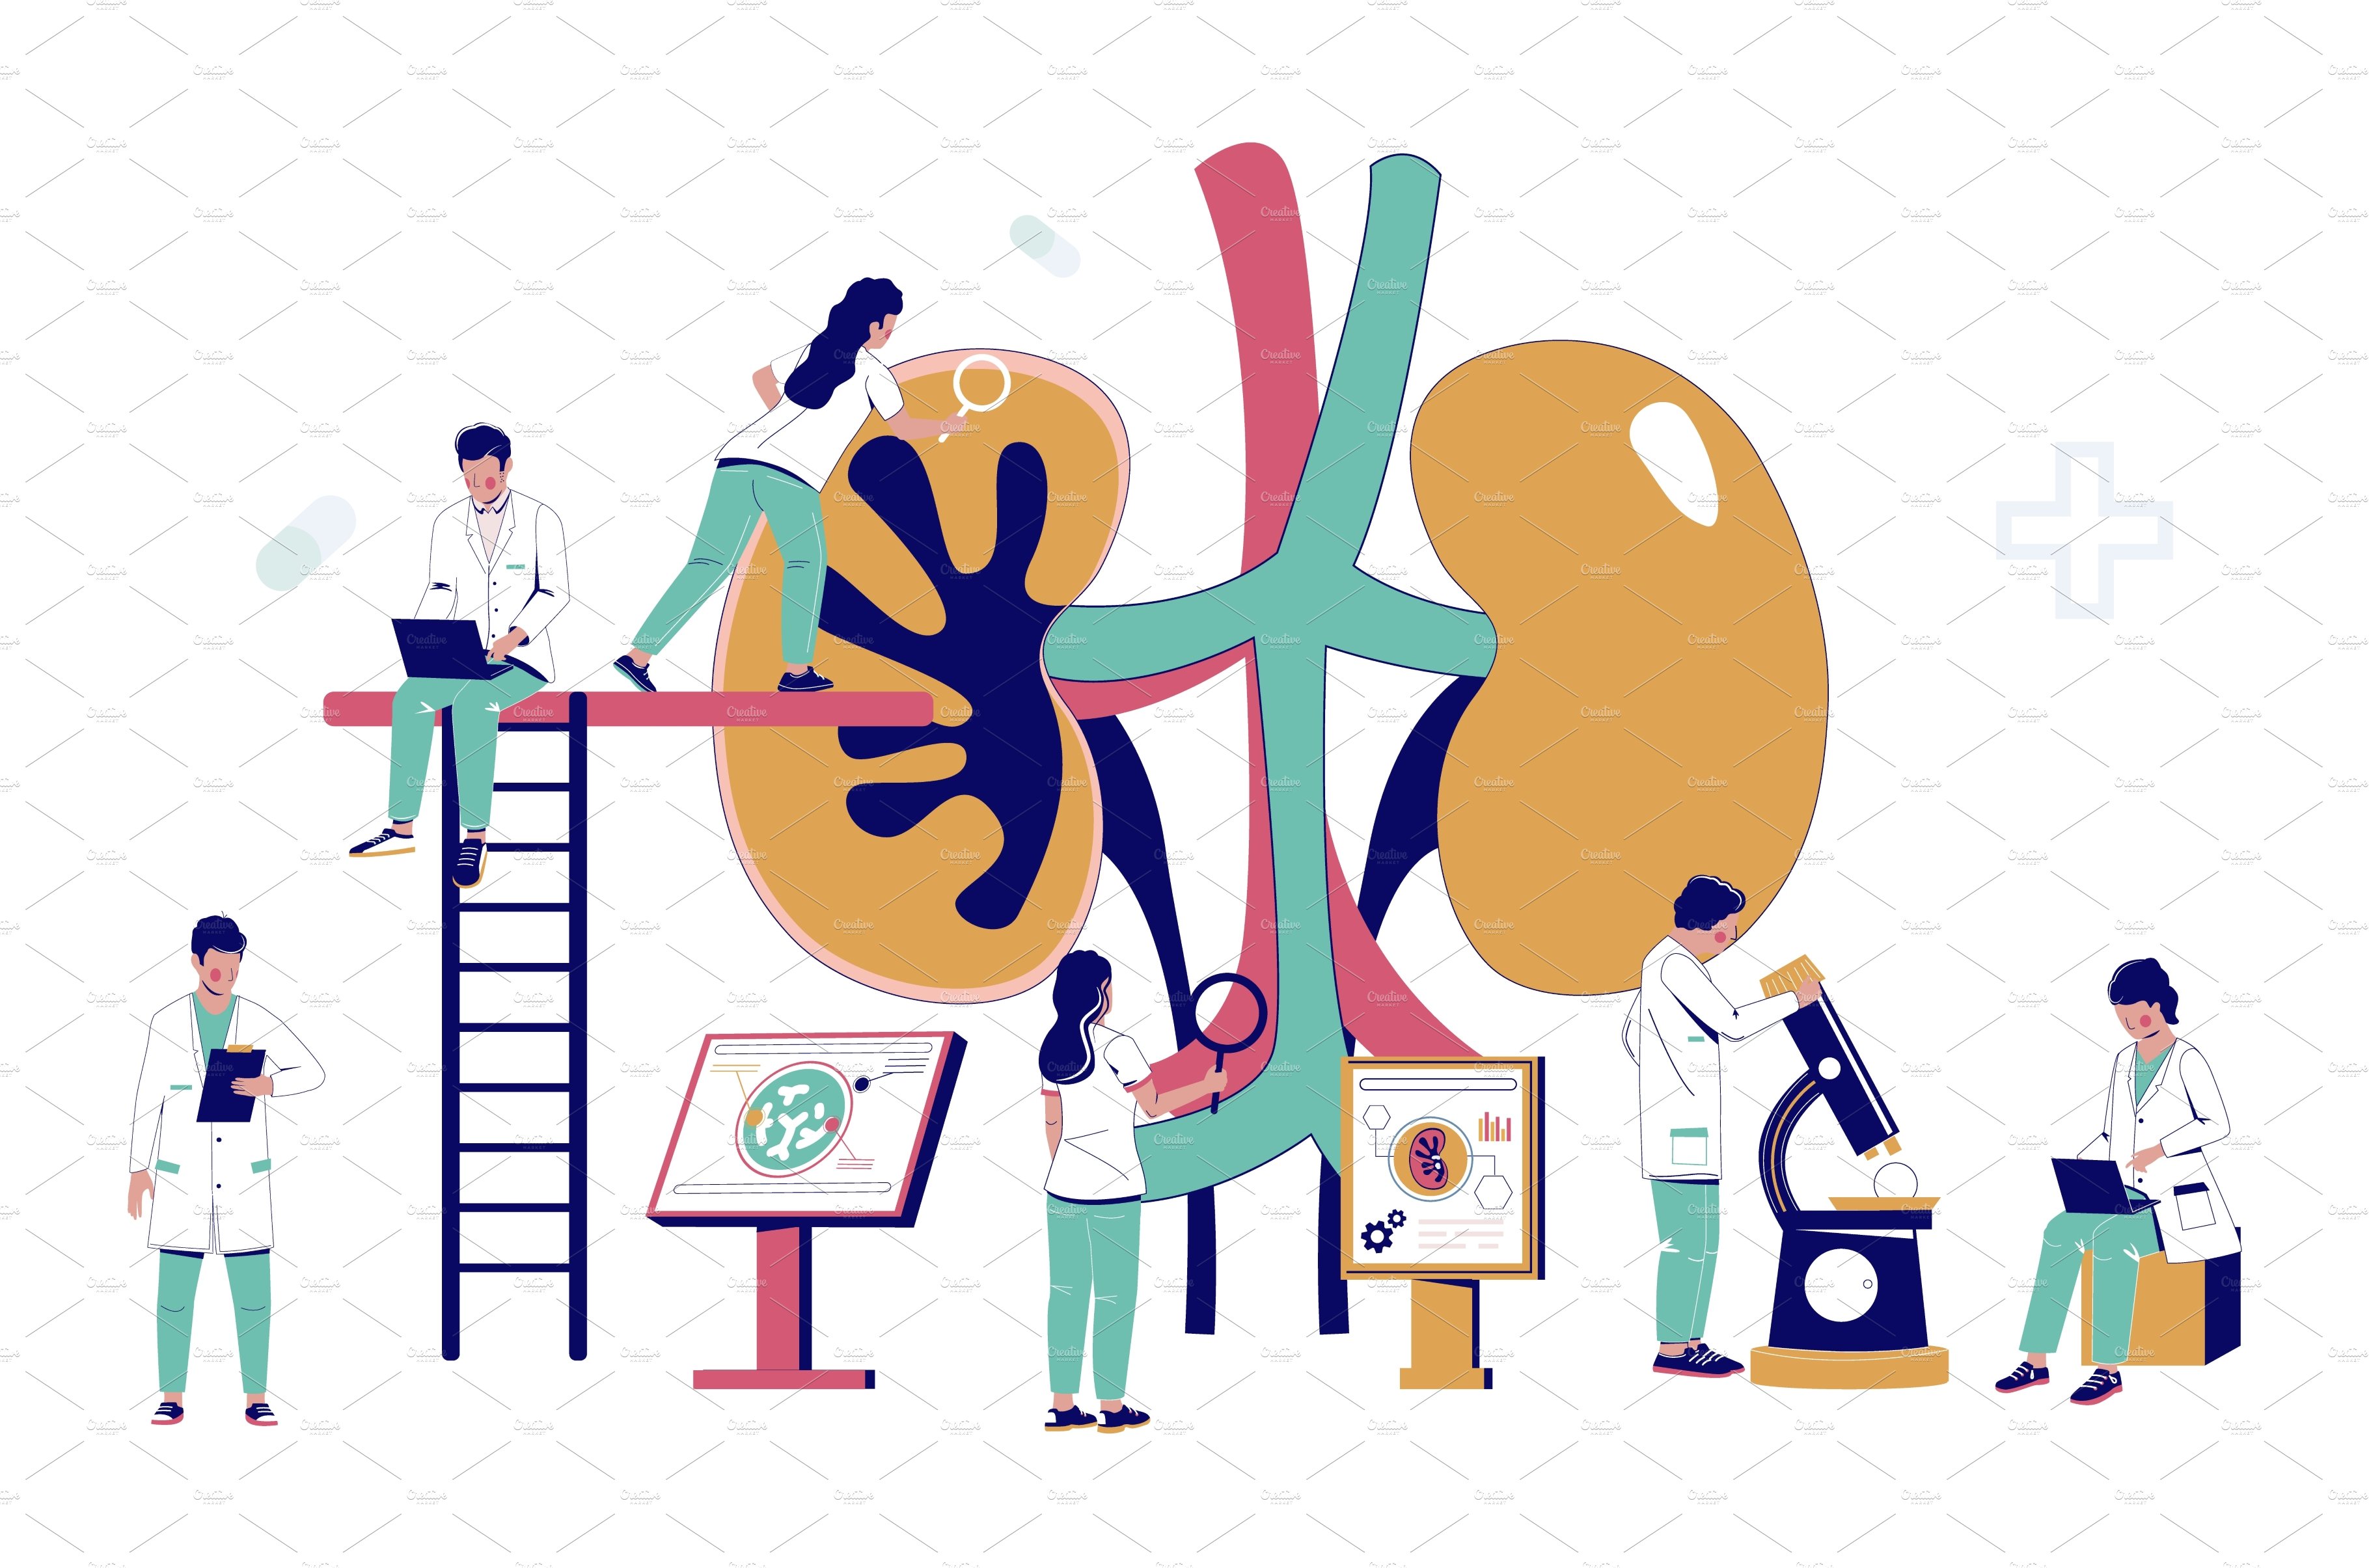 Doctors work on kidney treatment cover image.